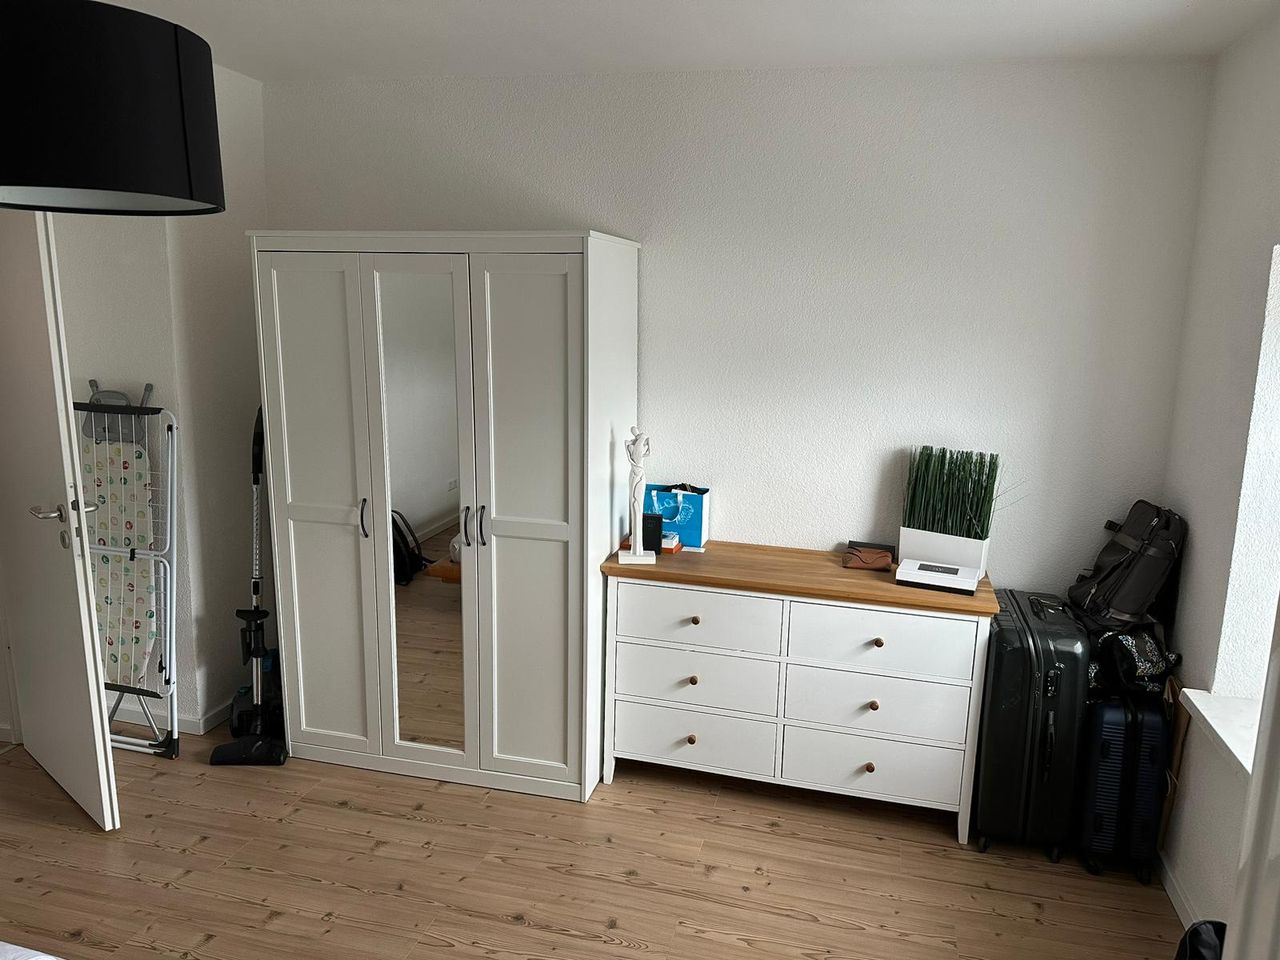 Furnished 2 room apartment in Ulm Söflingen. Property with janitor service and building service.